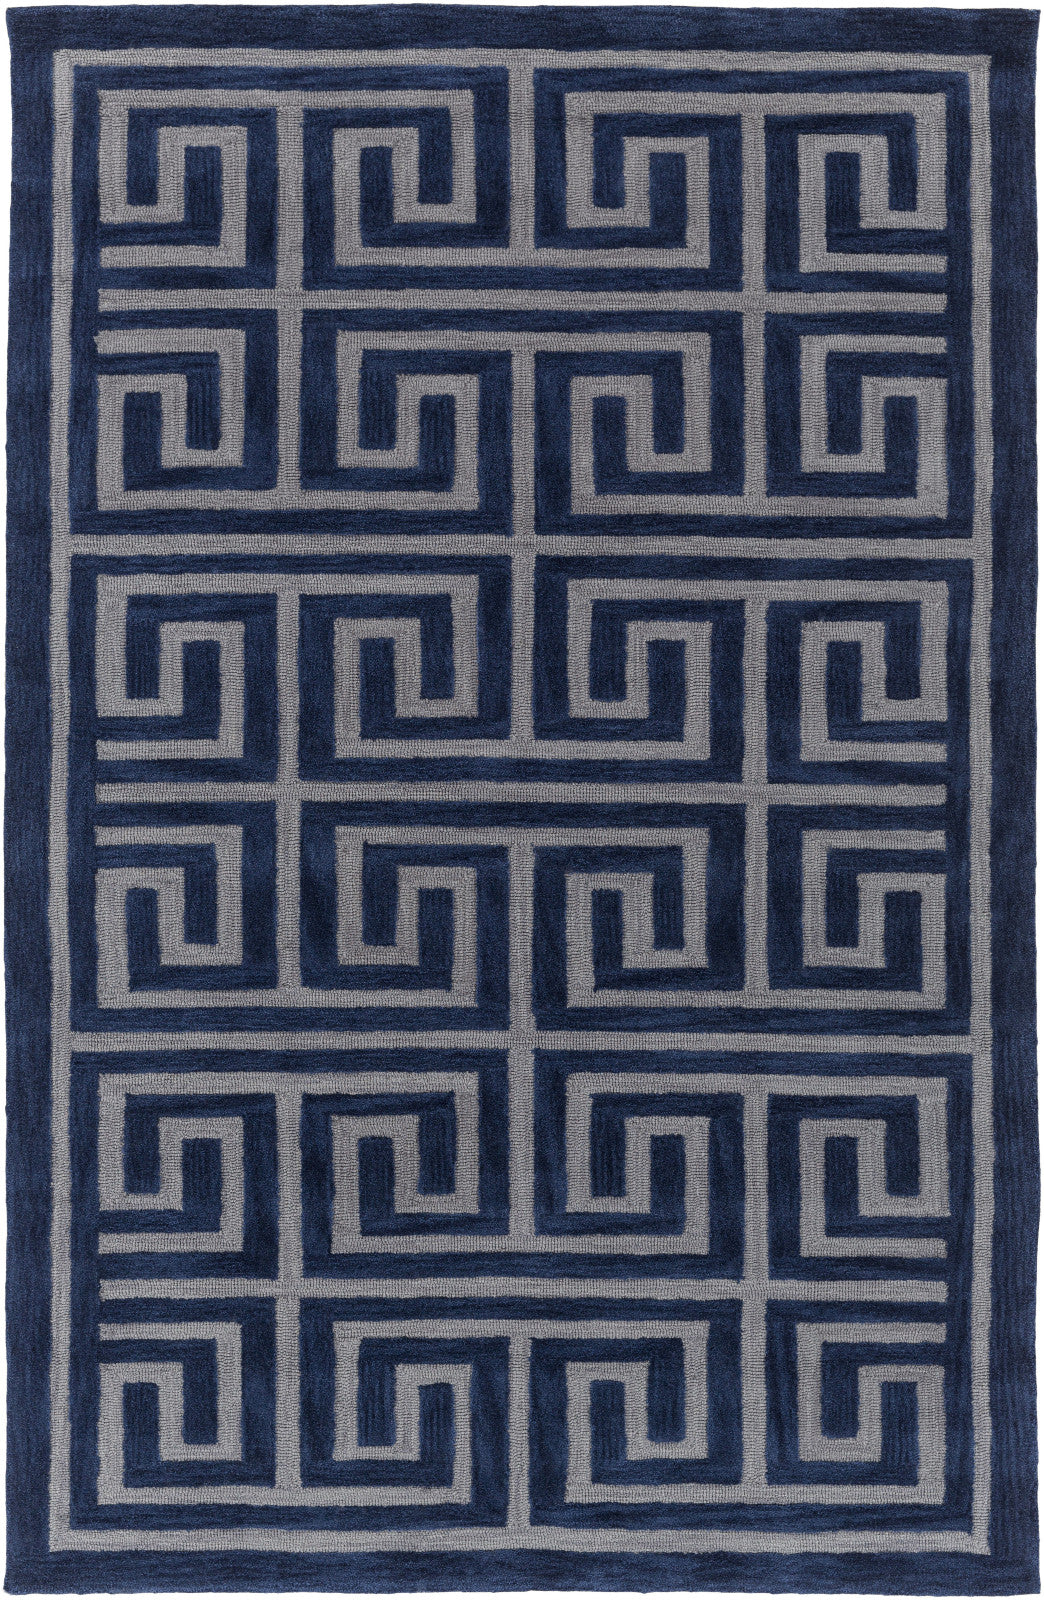 Artistic Weavers Holden Kennedy Navy Blue/Gray Area Rug main image